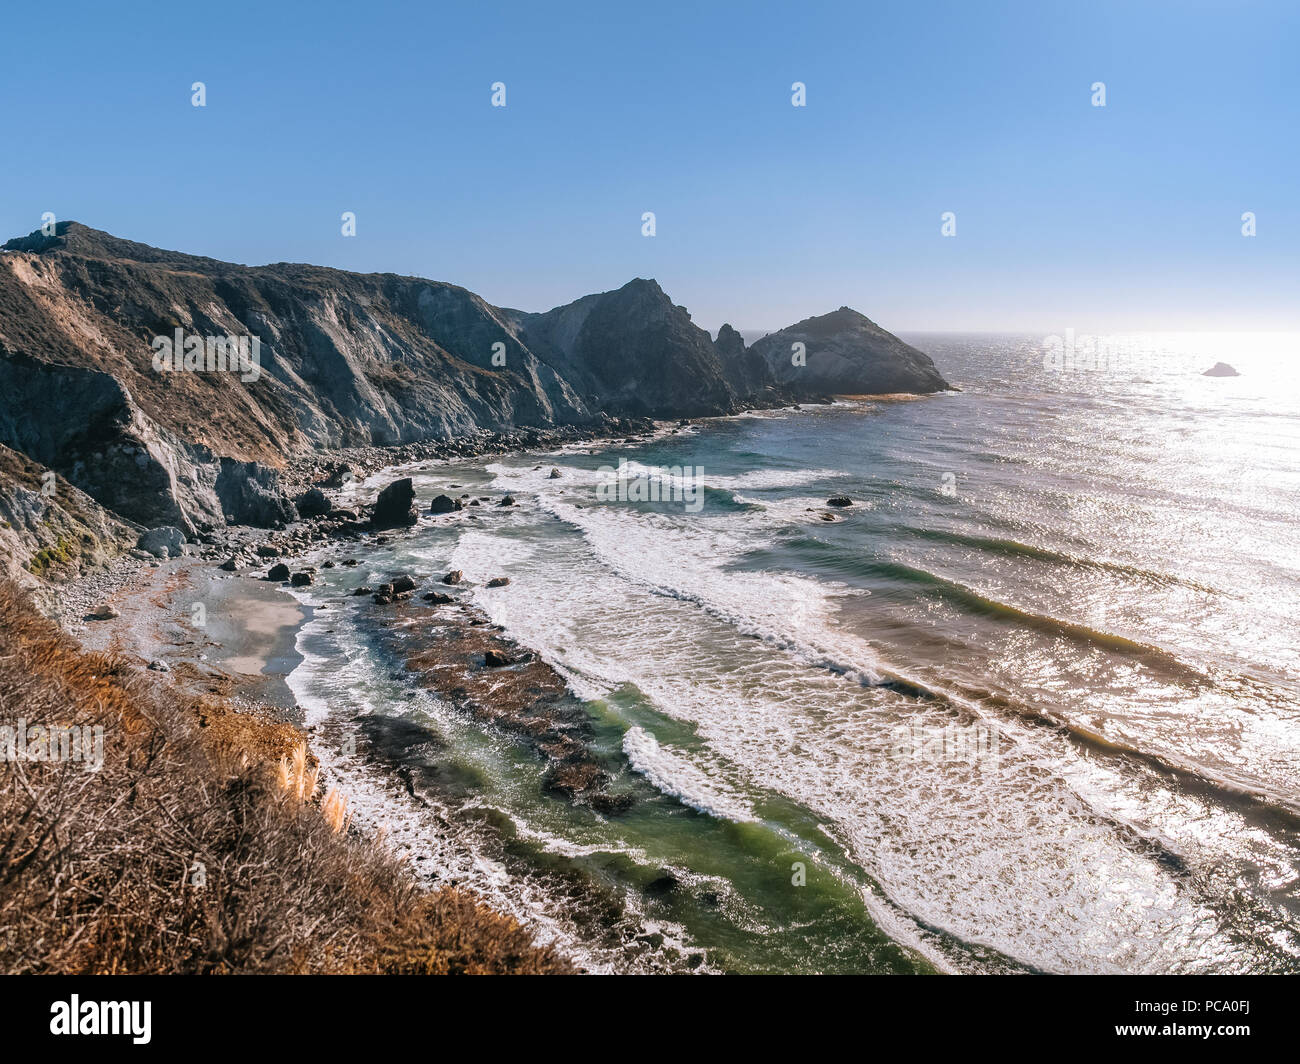 Early evening at Willow Creek Beach near Big Sur, California. View from the popular vista point off Cabrillo Highway along the Pacific Coast. Stock Photo